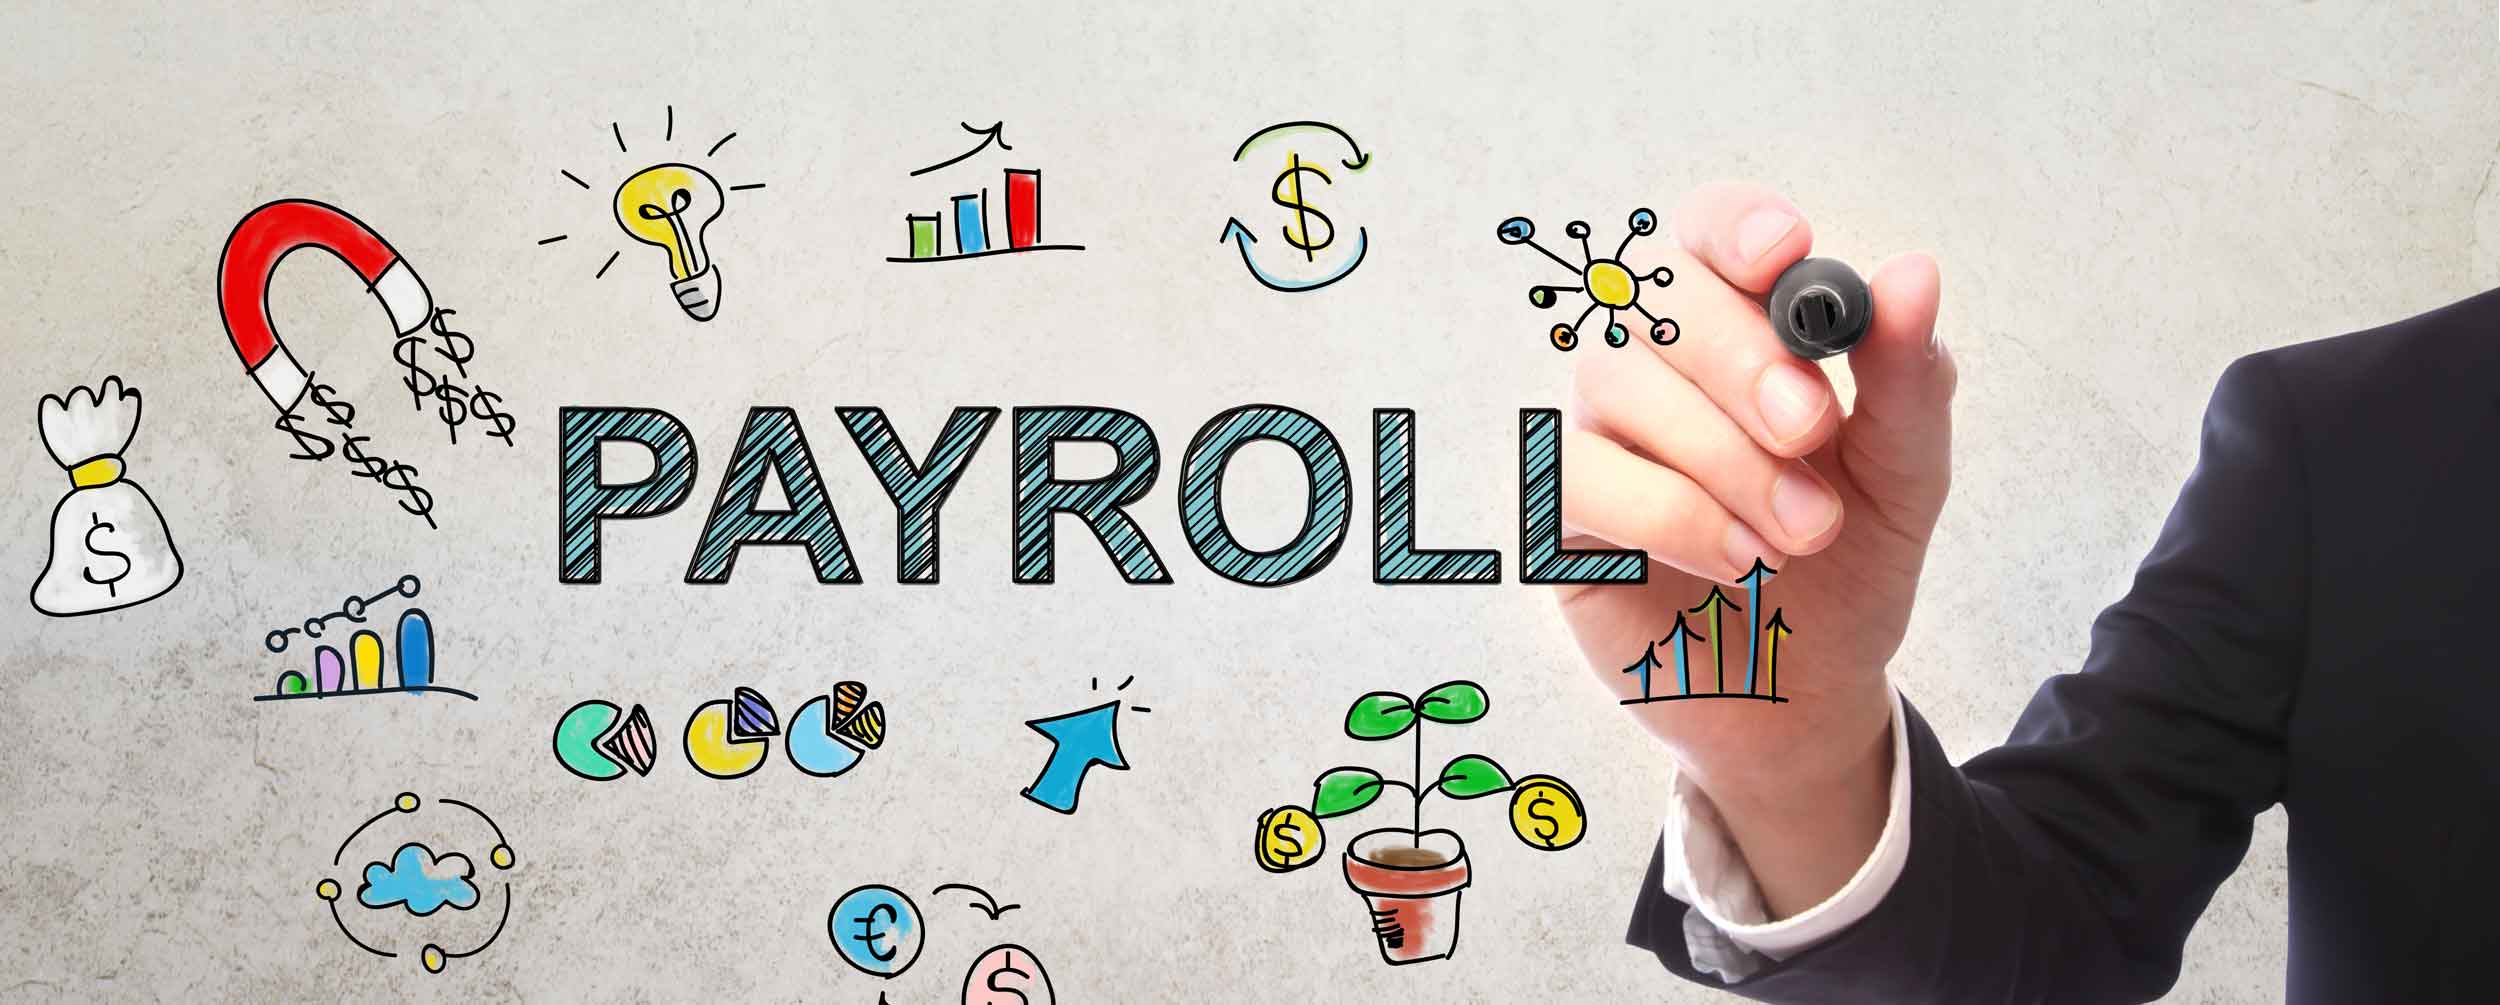 Mobile image of a person drawing on a board with the word payroll and other colorful financial icons